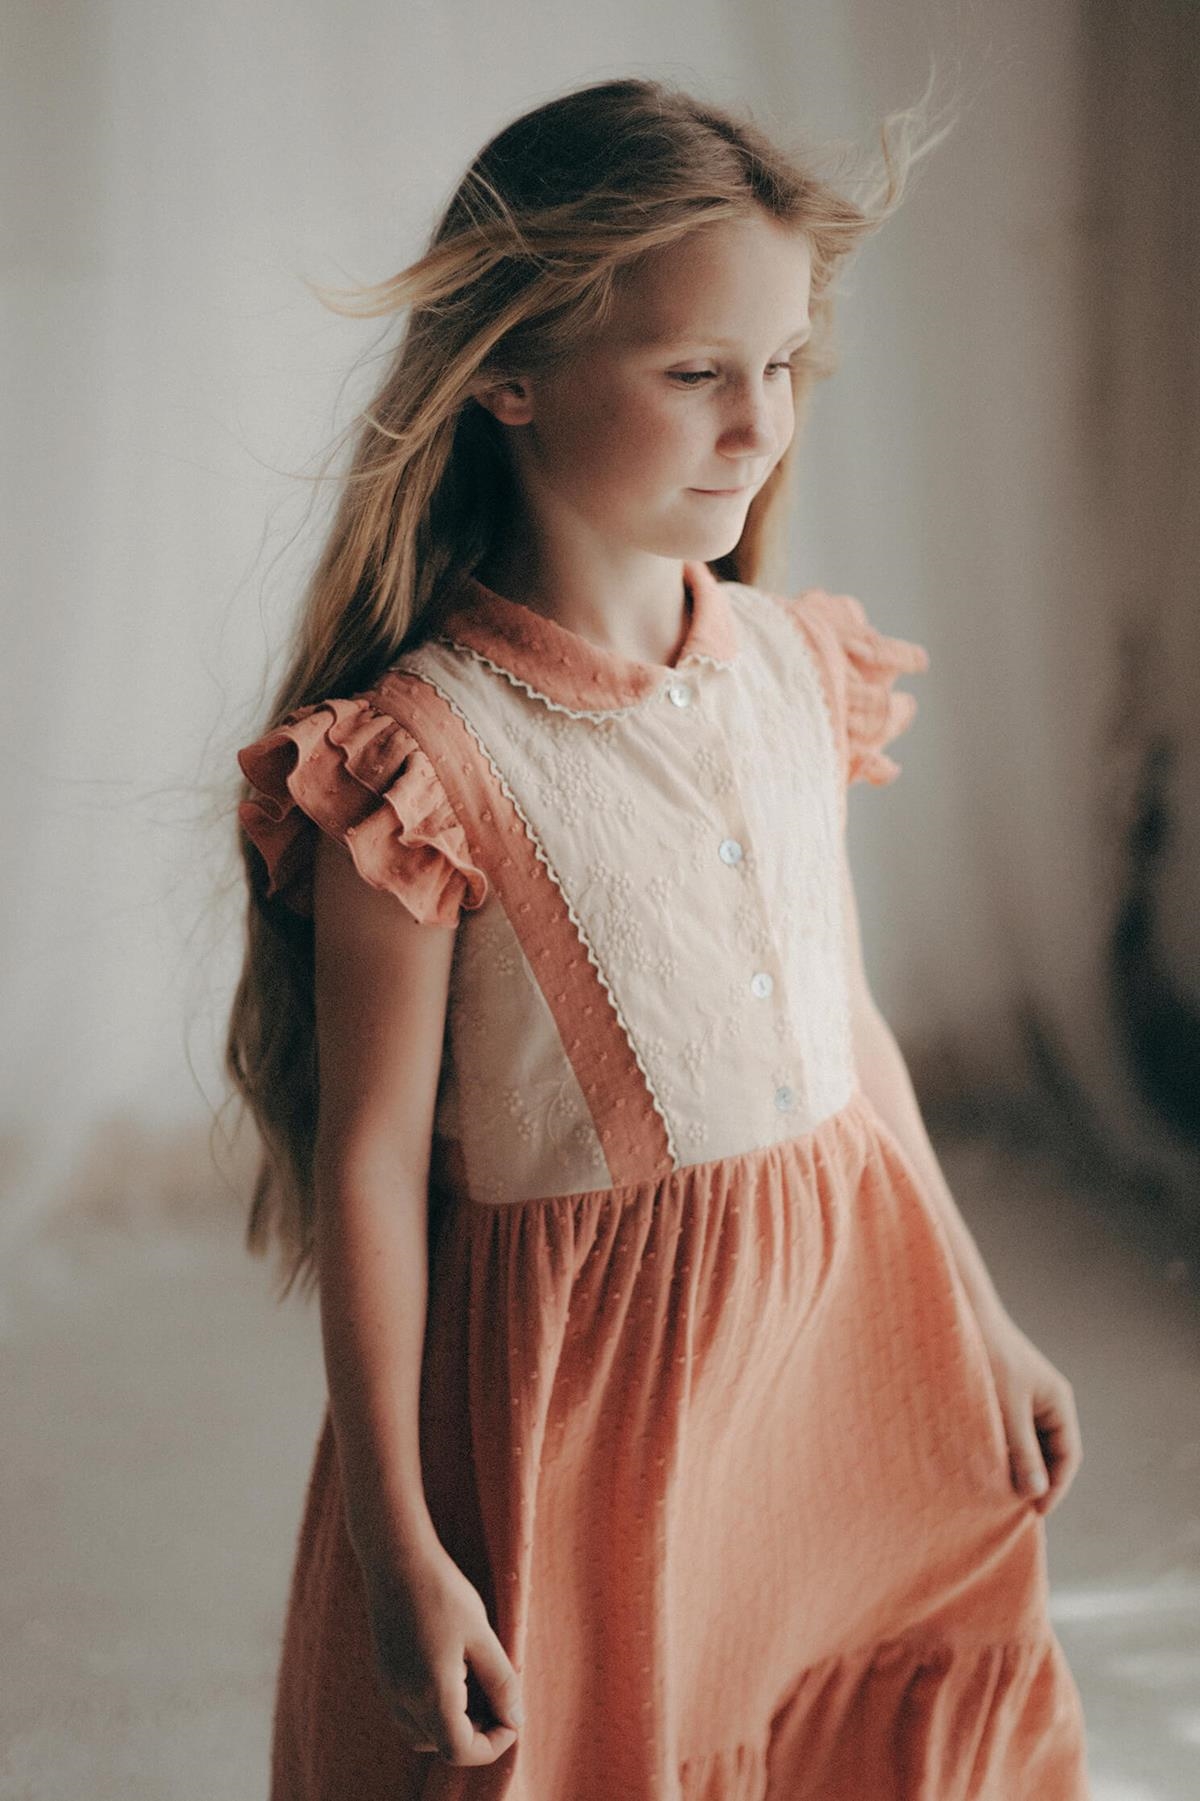 Mod.30.2 Organic coral dress with baby-style collar | SS23 Mod.30.2 Organic coral dress with baby-style collar